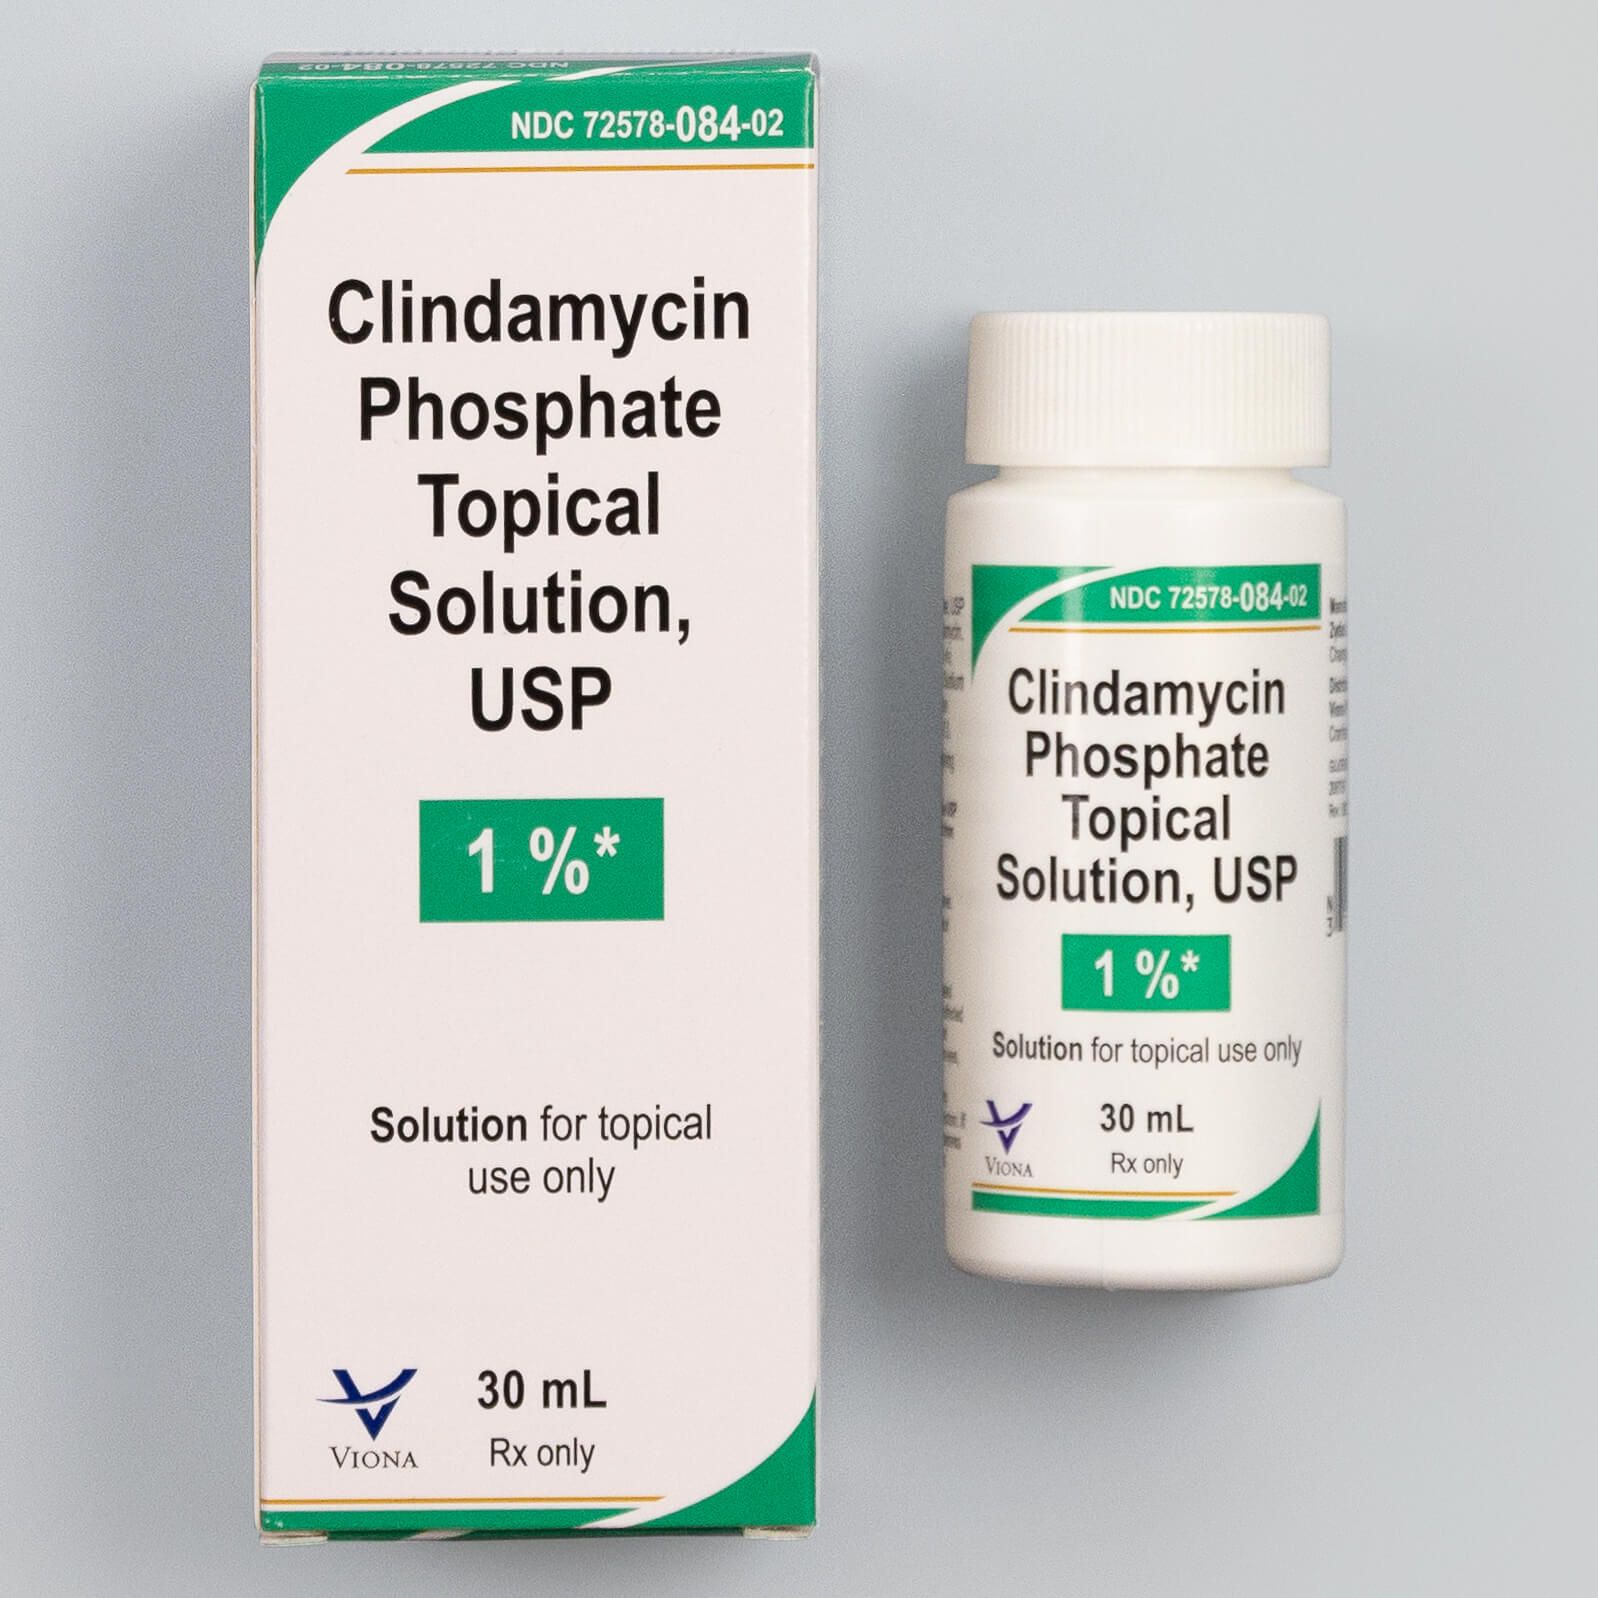 An image of clindamycin topical solution